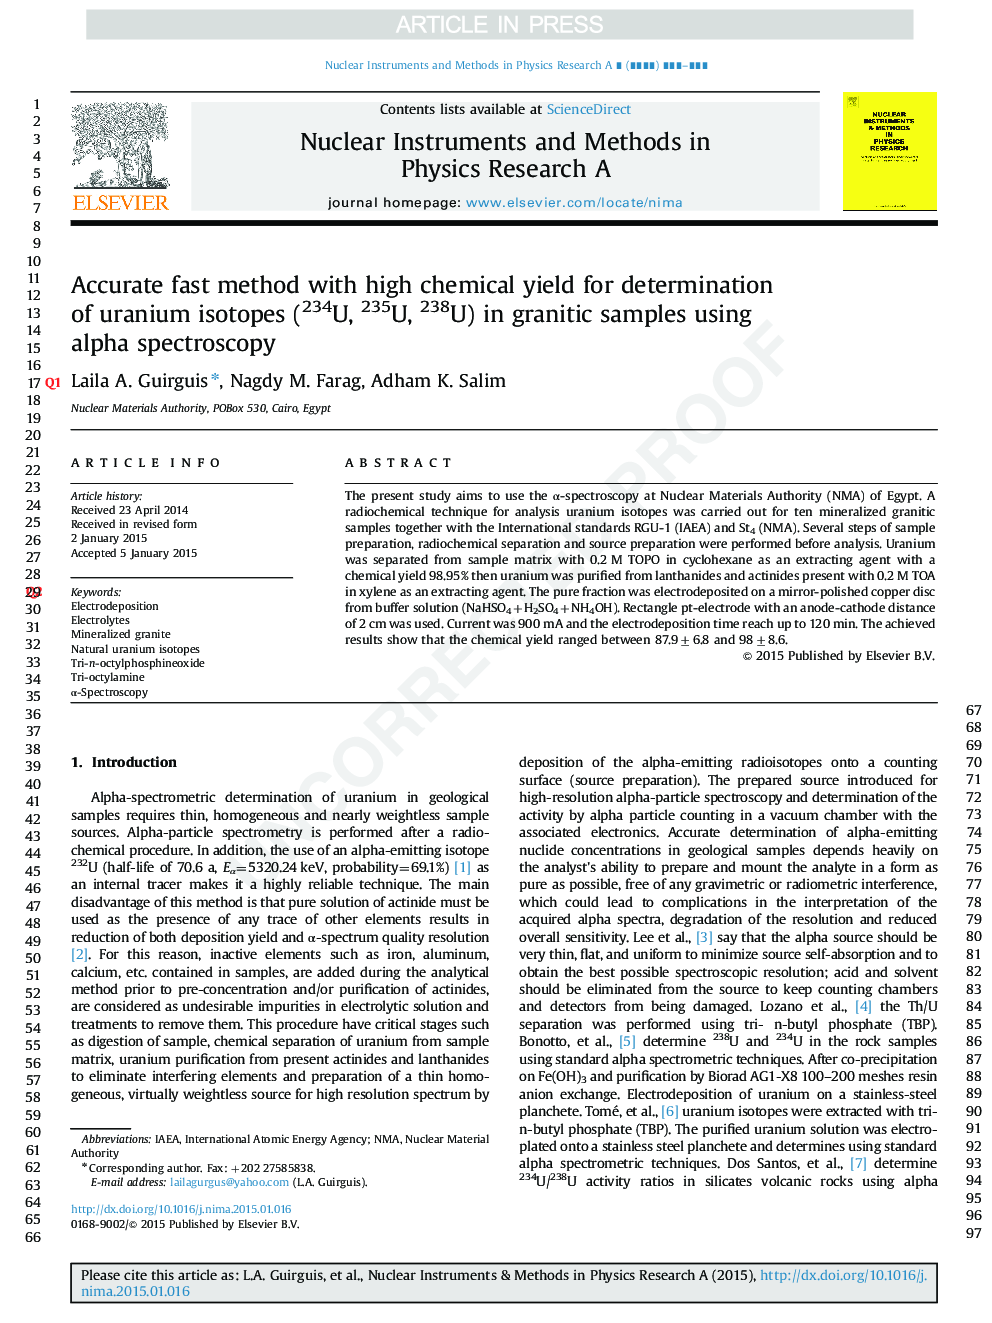 Accurate fast method with high chemical yield for determination of uranium isotopes (234U, 235U, 238U) in granitic samples using alpha spectroscopy